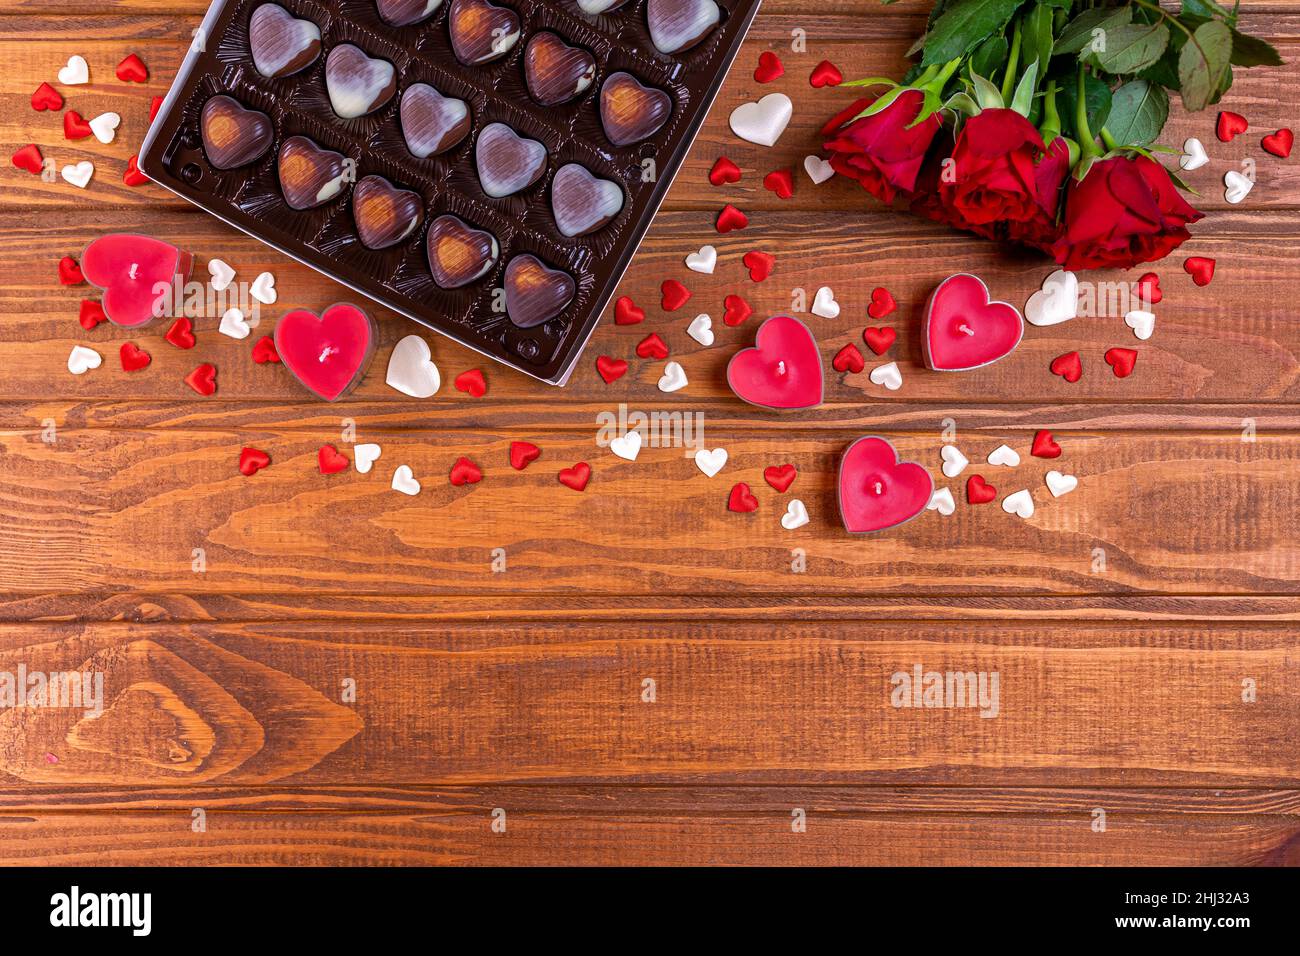 Valentines Day concept chocolate candies heart shaped and red roses with candles on wood. Love and romance concept. Stock Photo